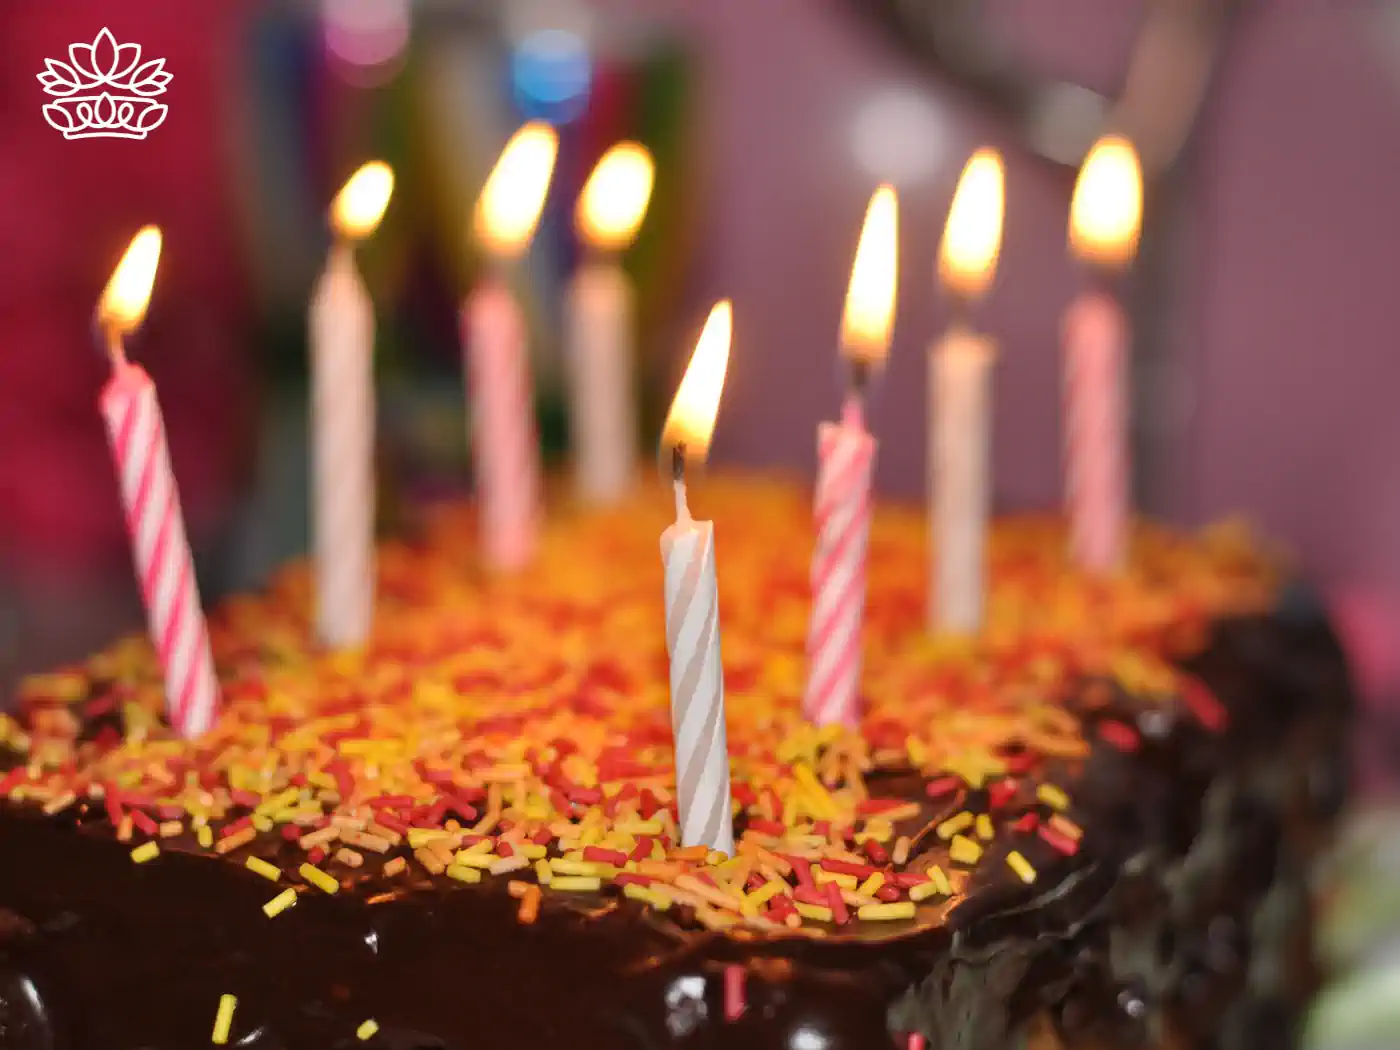 A close-up of a chocolate cake with colorful candles lit on top. Fabulous Flowers and Gifts.